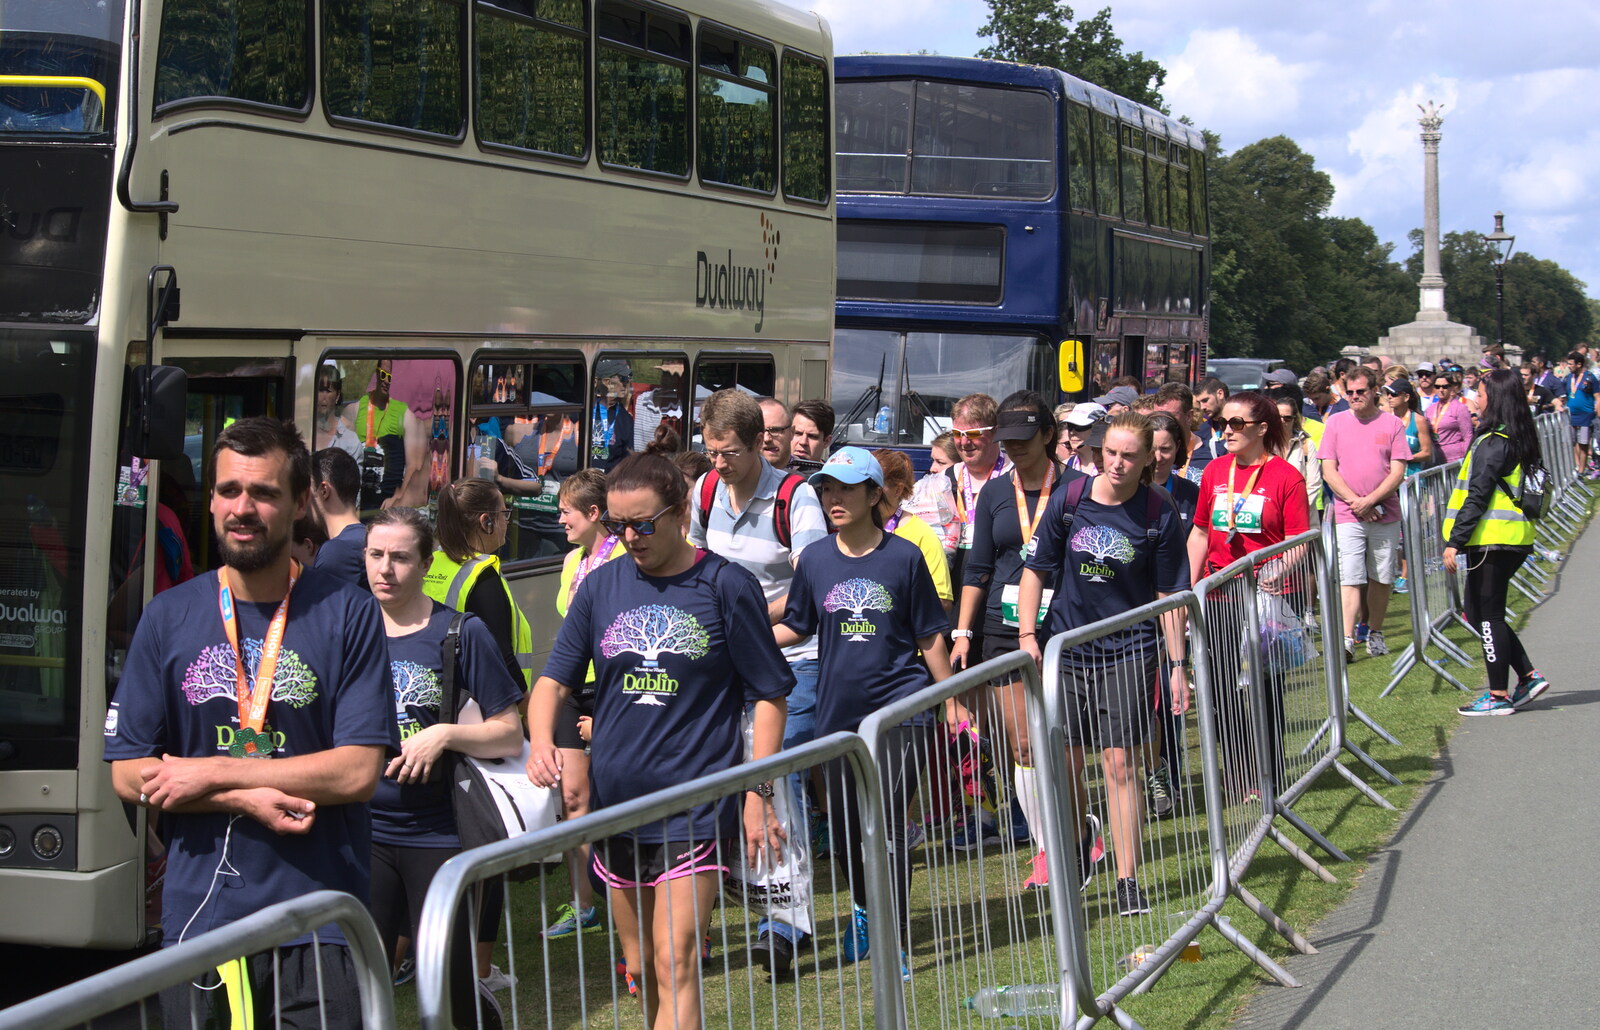 There's a big queue for the bus from Isobel's Rock'n'Roll Half Marathon, Dublin, Ireland - 13th August 2017